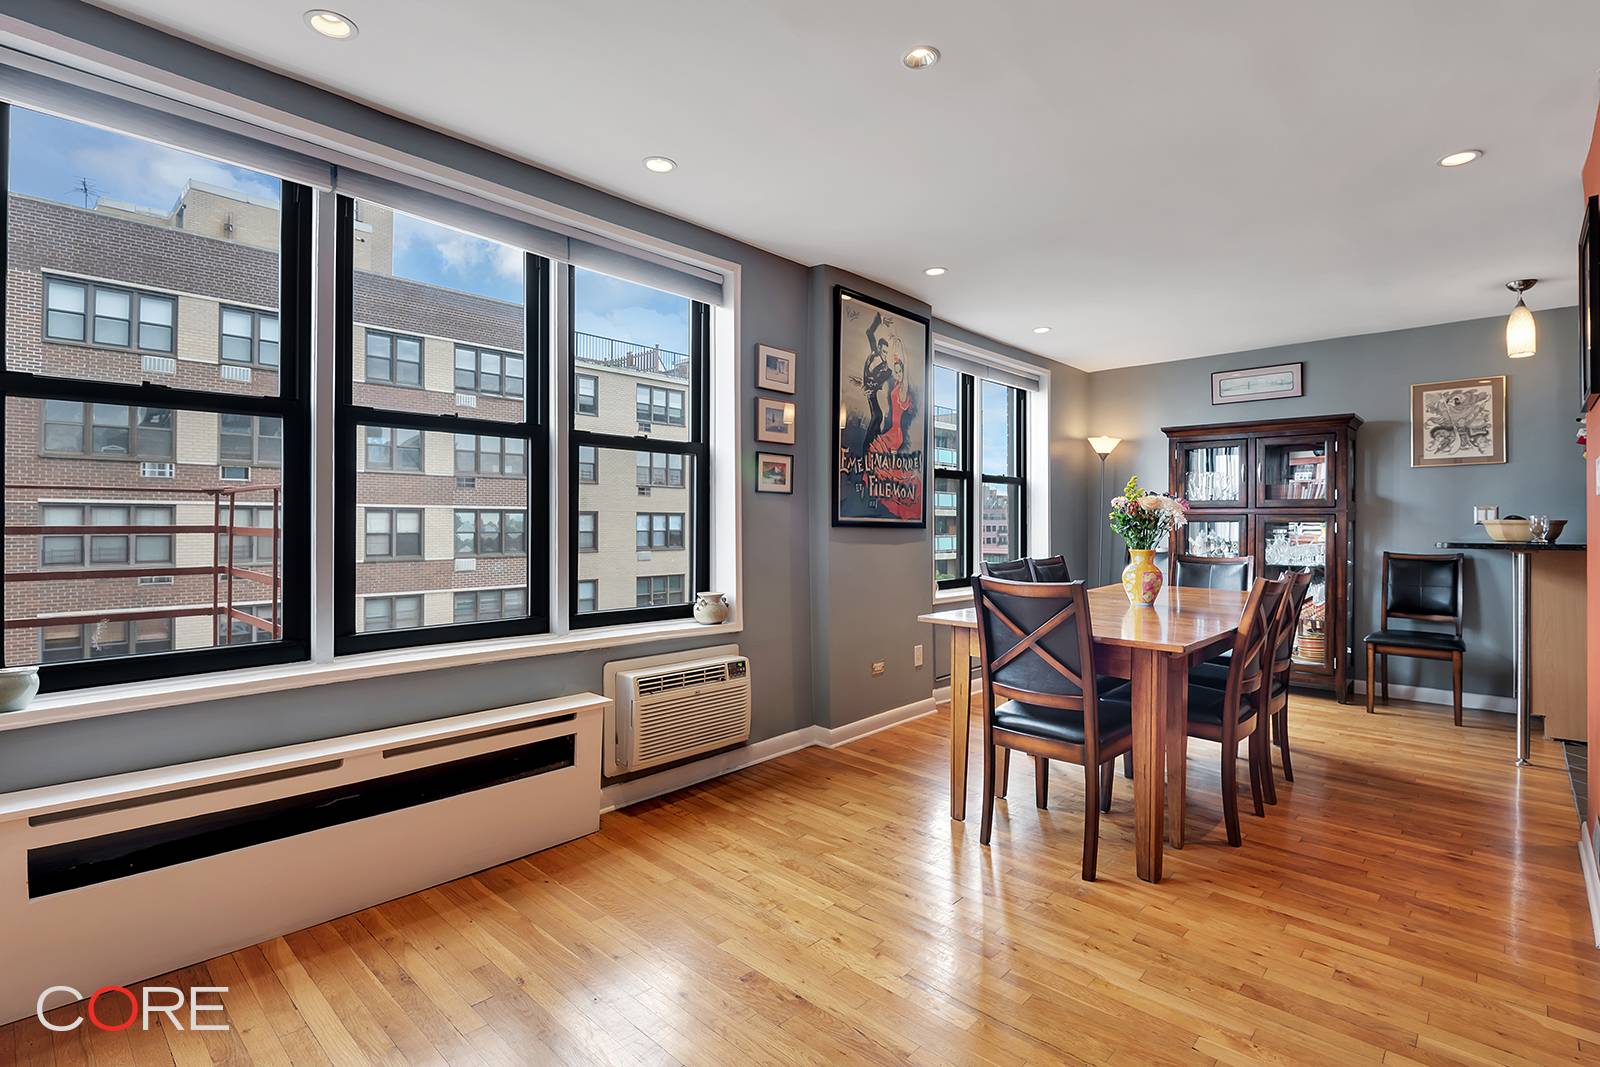 Perched on the top floor, this well renovated and lovingly kept floor through home offers a spacious and flexible layout, as well as high end finishes, an abundance of windows, ...